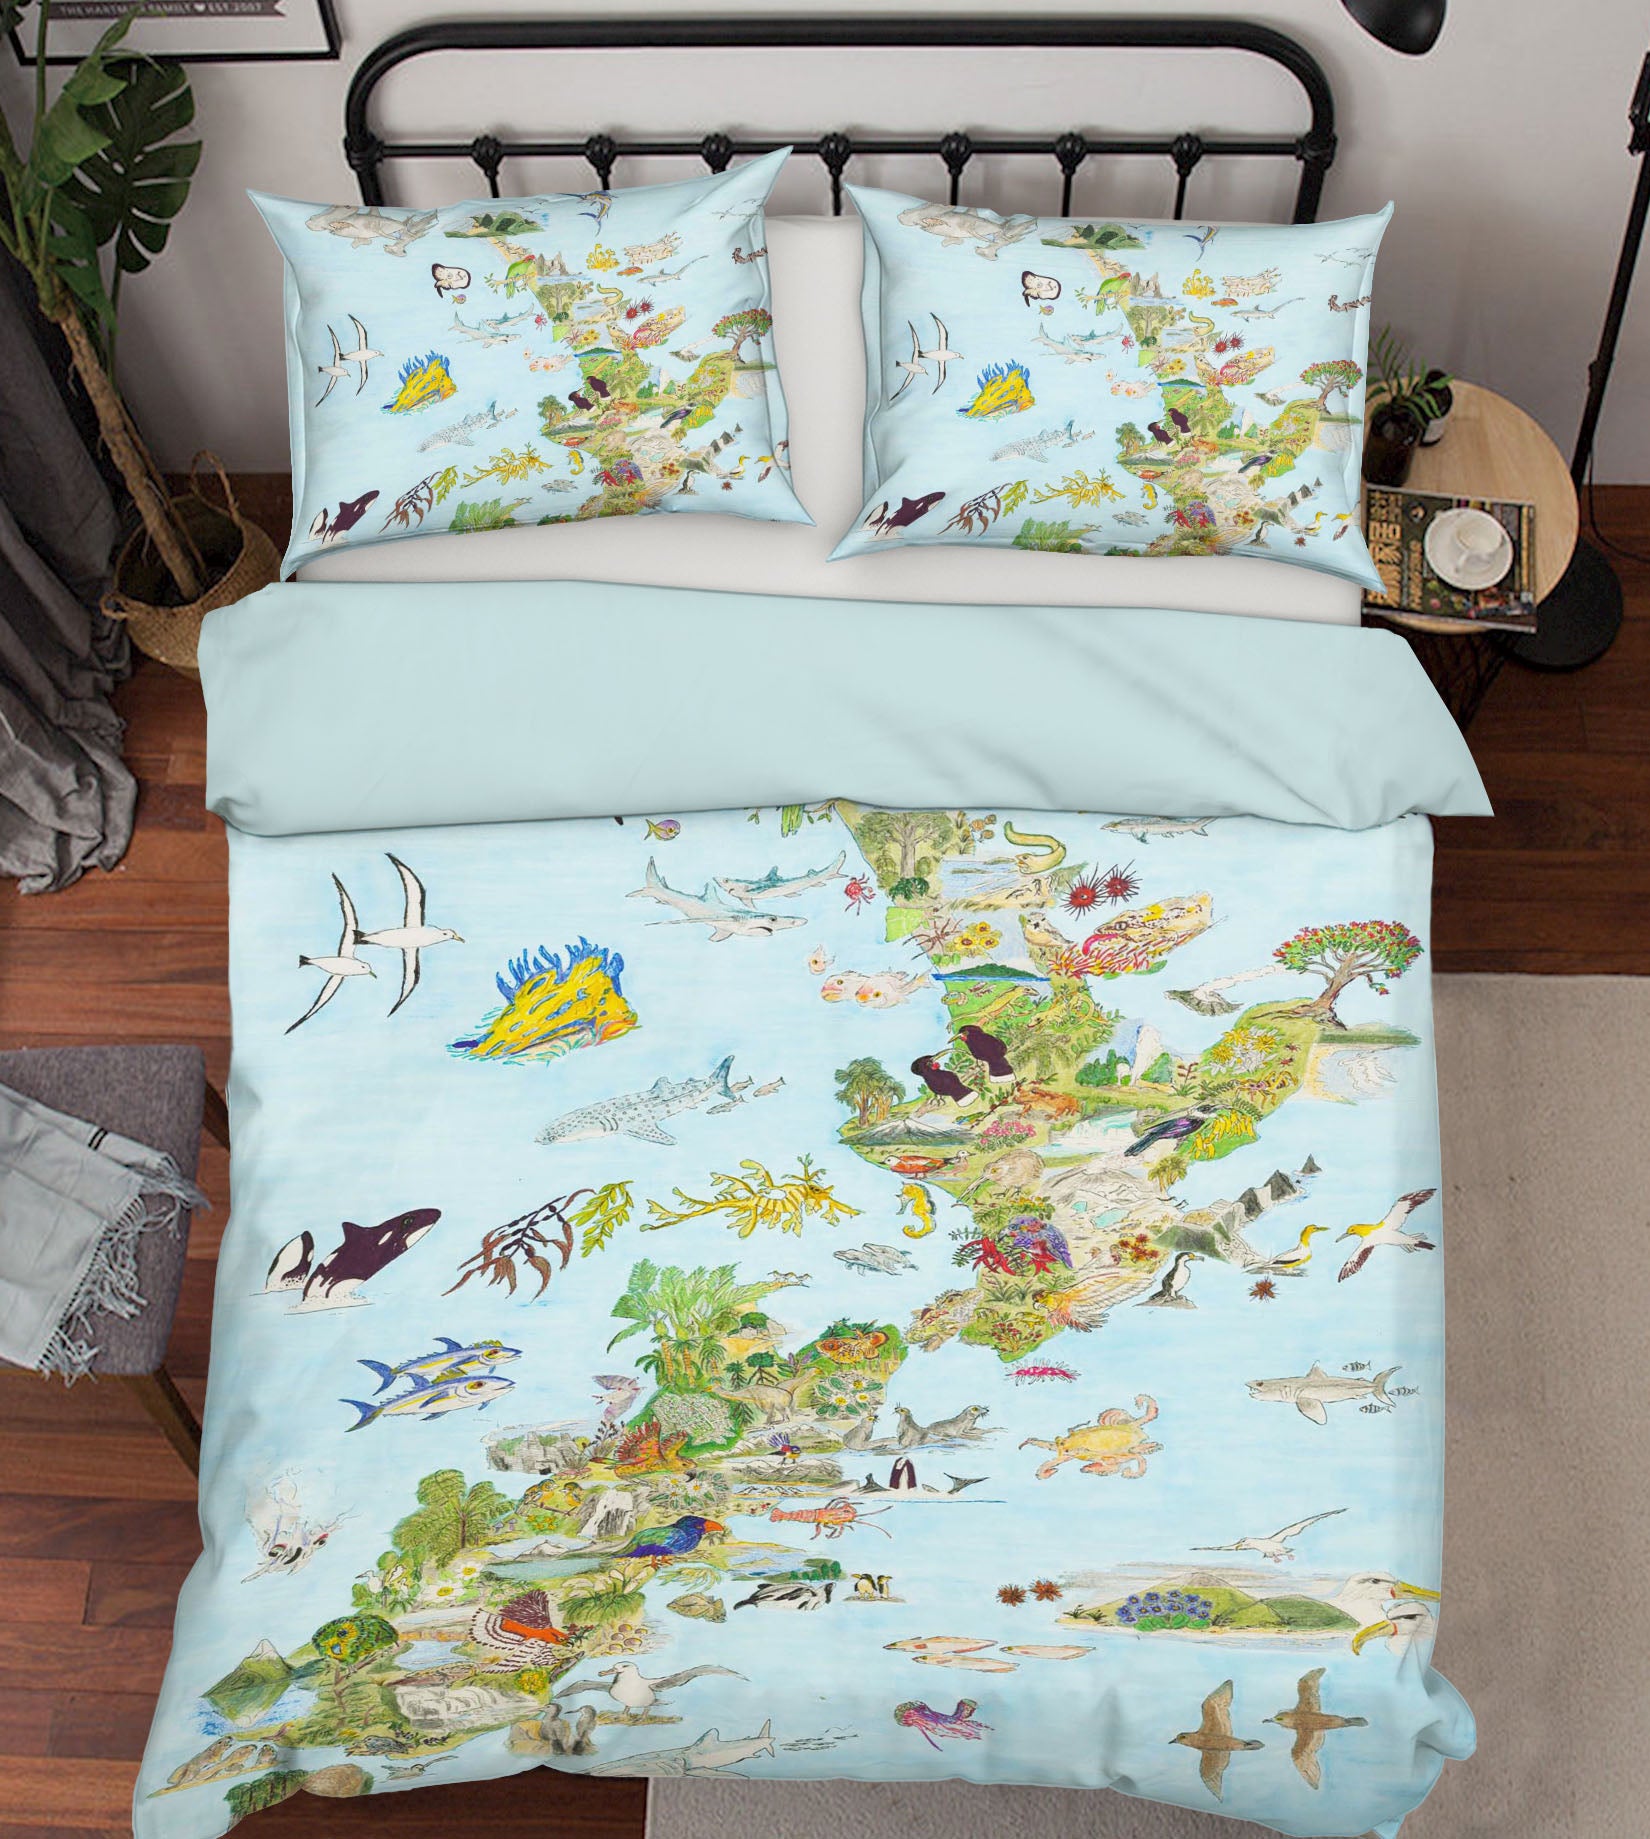 3D Animal Forest 032 Michael Sewell Bedding Bed Pillowcases Quilt